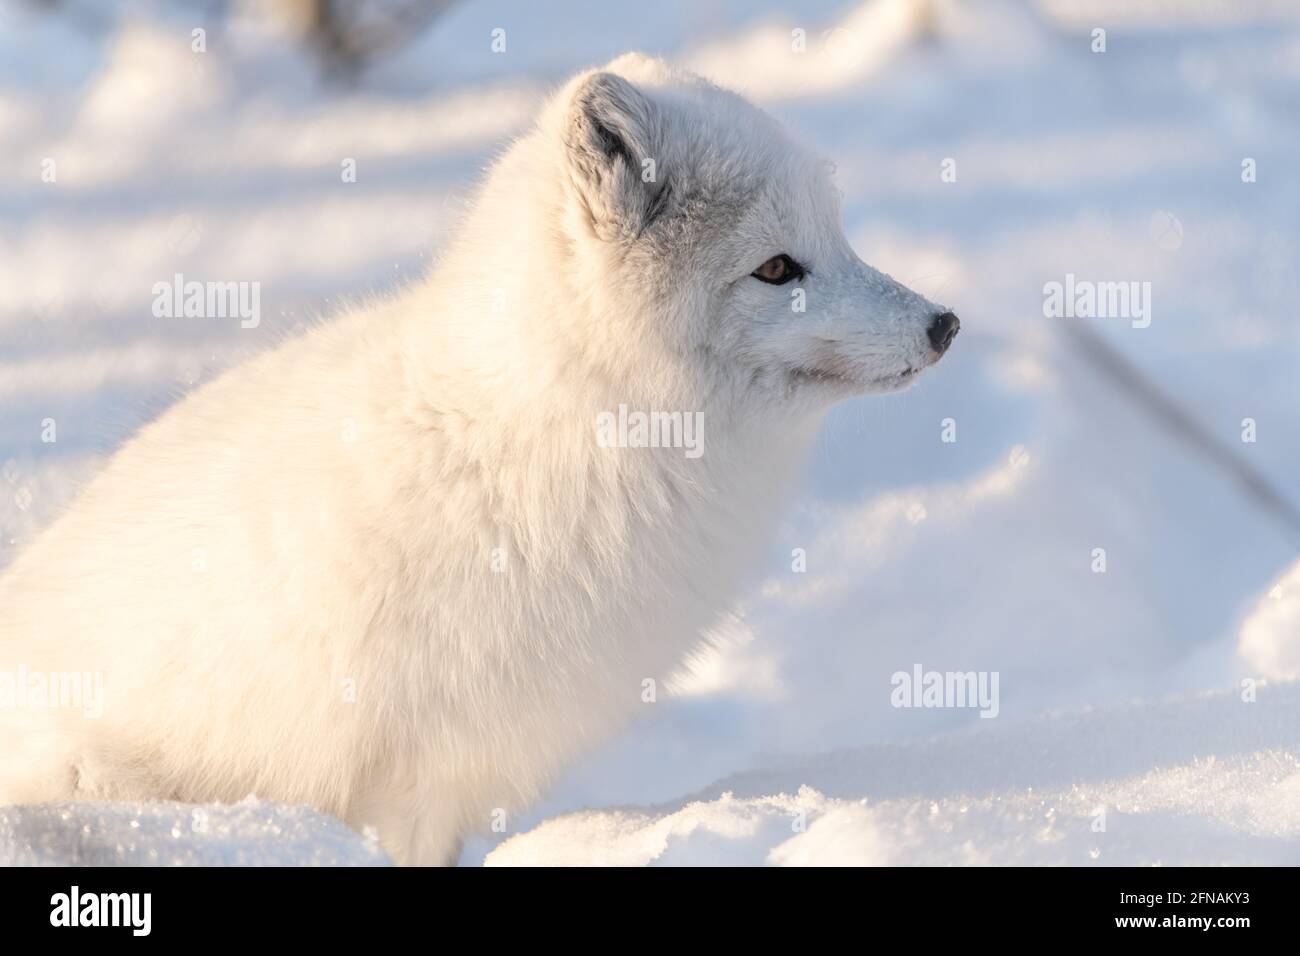 Side profile of one, single, alone arctic fox in a natural, snowy, winter setting with orange eyes. Fluffy, adorable and wild foxes. Stock Photo